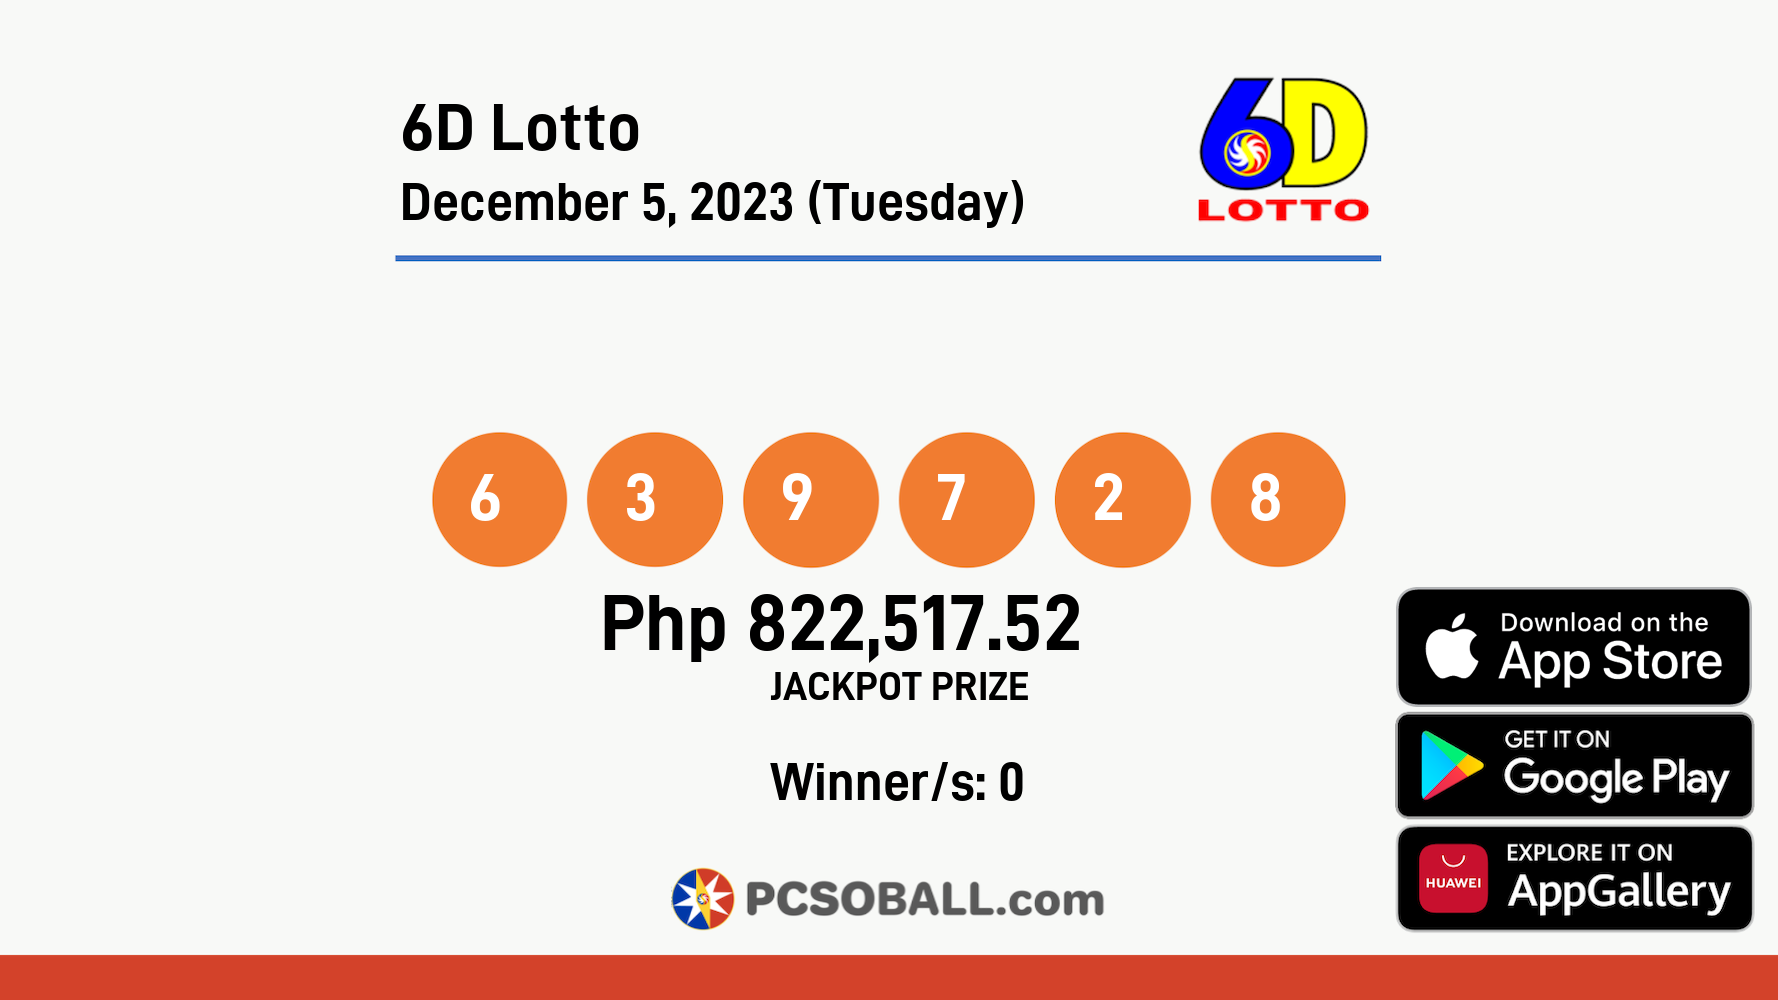 6D Lotto December 5, 2023 (Tuesday) Result